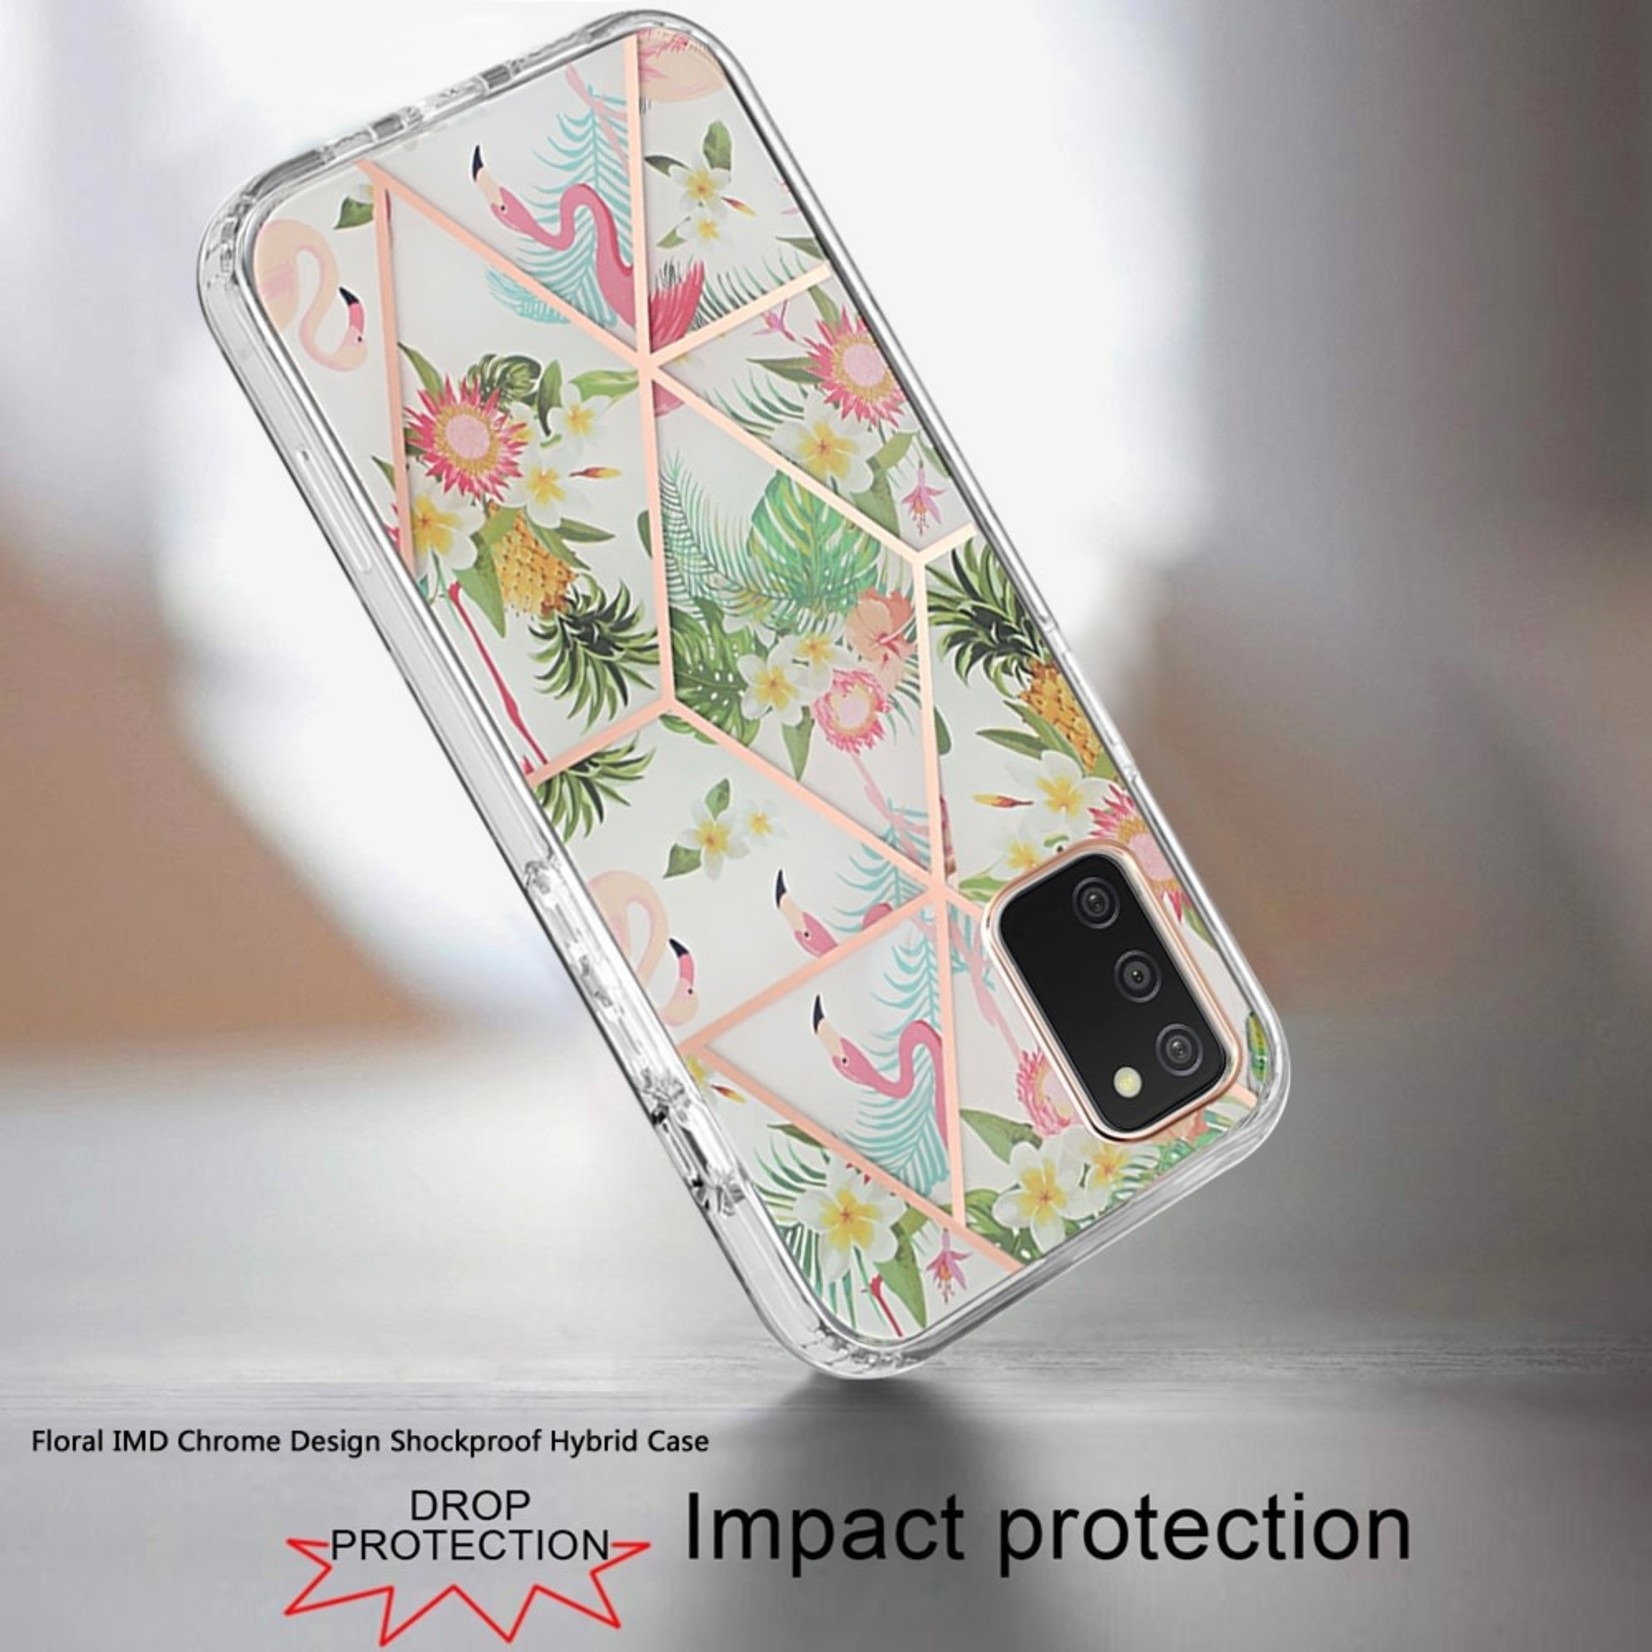 Samsung Floral IMD Chrome Design Shockproof Hybrid Case Cover - Foral A, For Samsung Galaxy A03s 2022